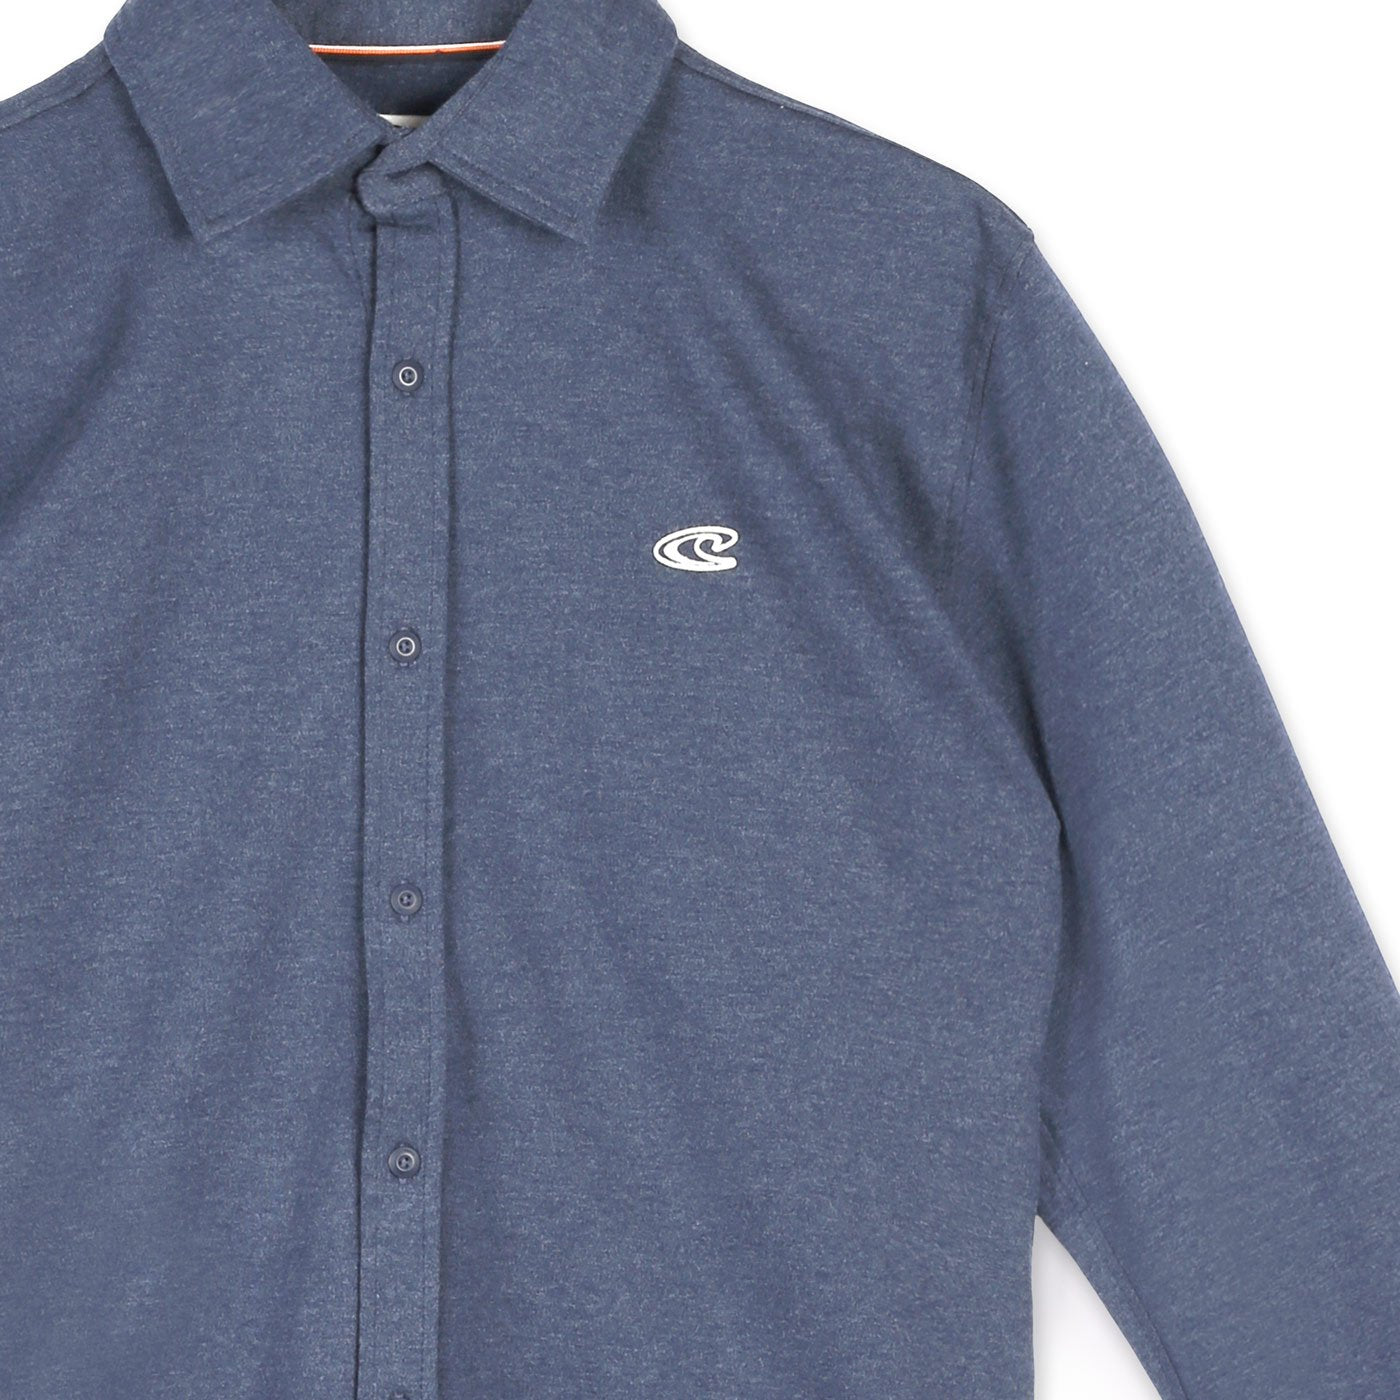 O'Neill Lm Jersey Solid Shirt | Ing